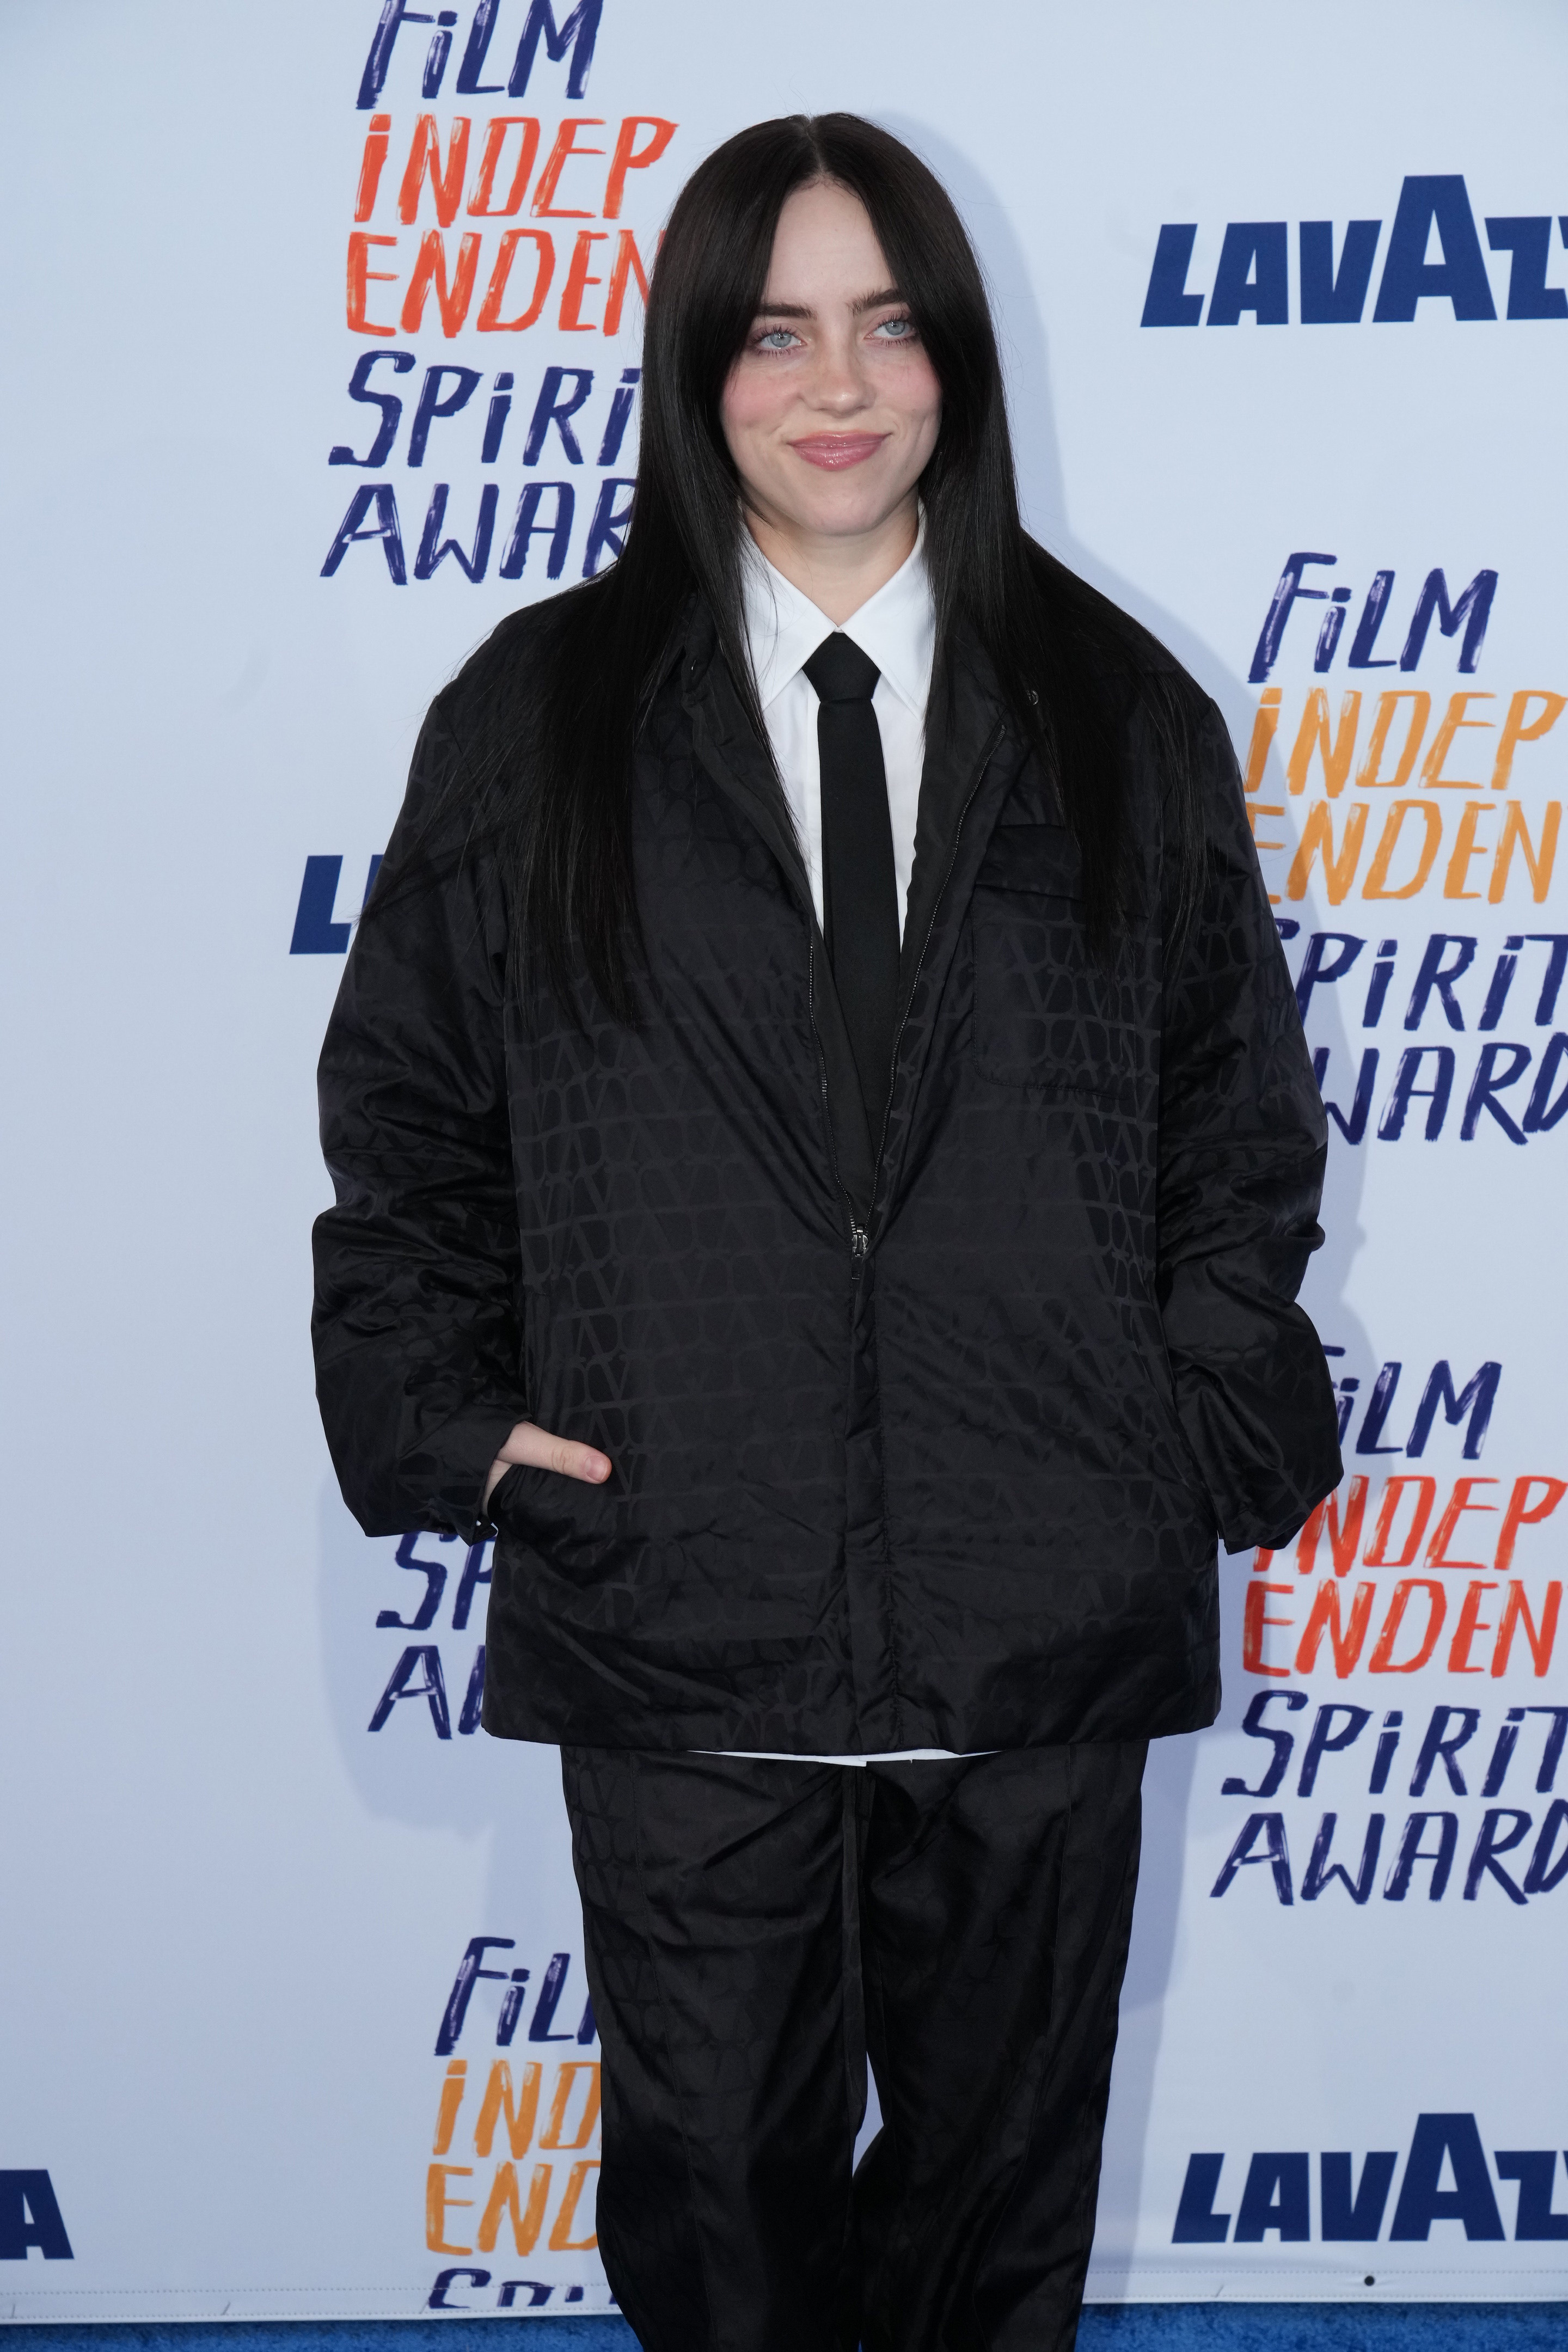 Billie Eilish on a backdrop, wearing an oversized patterned jacket and pants with hands in pockets